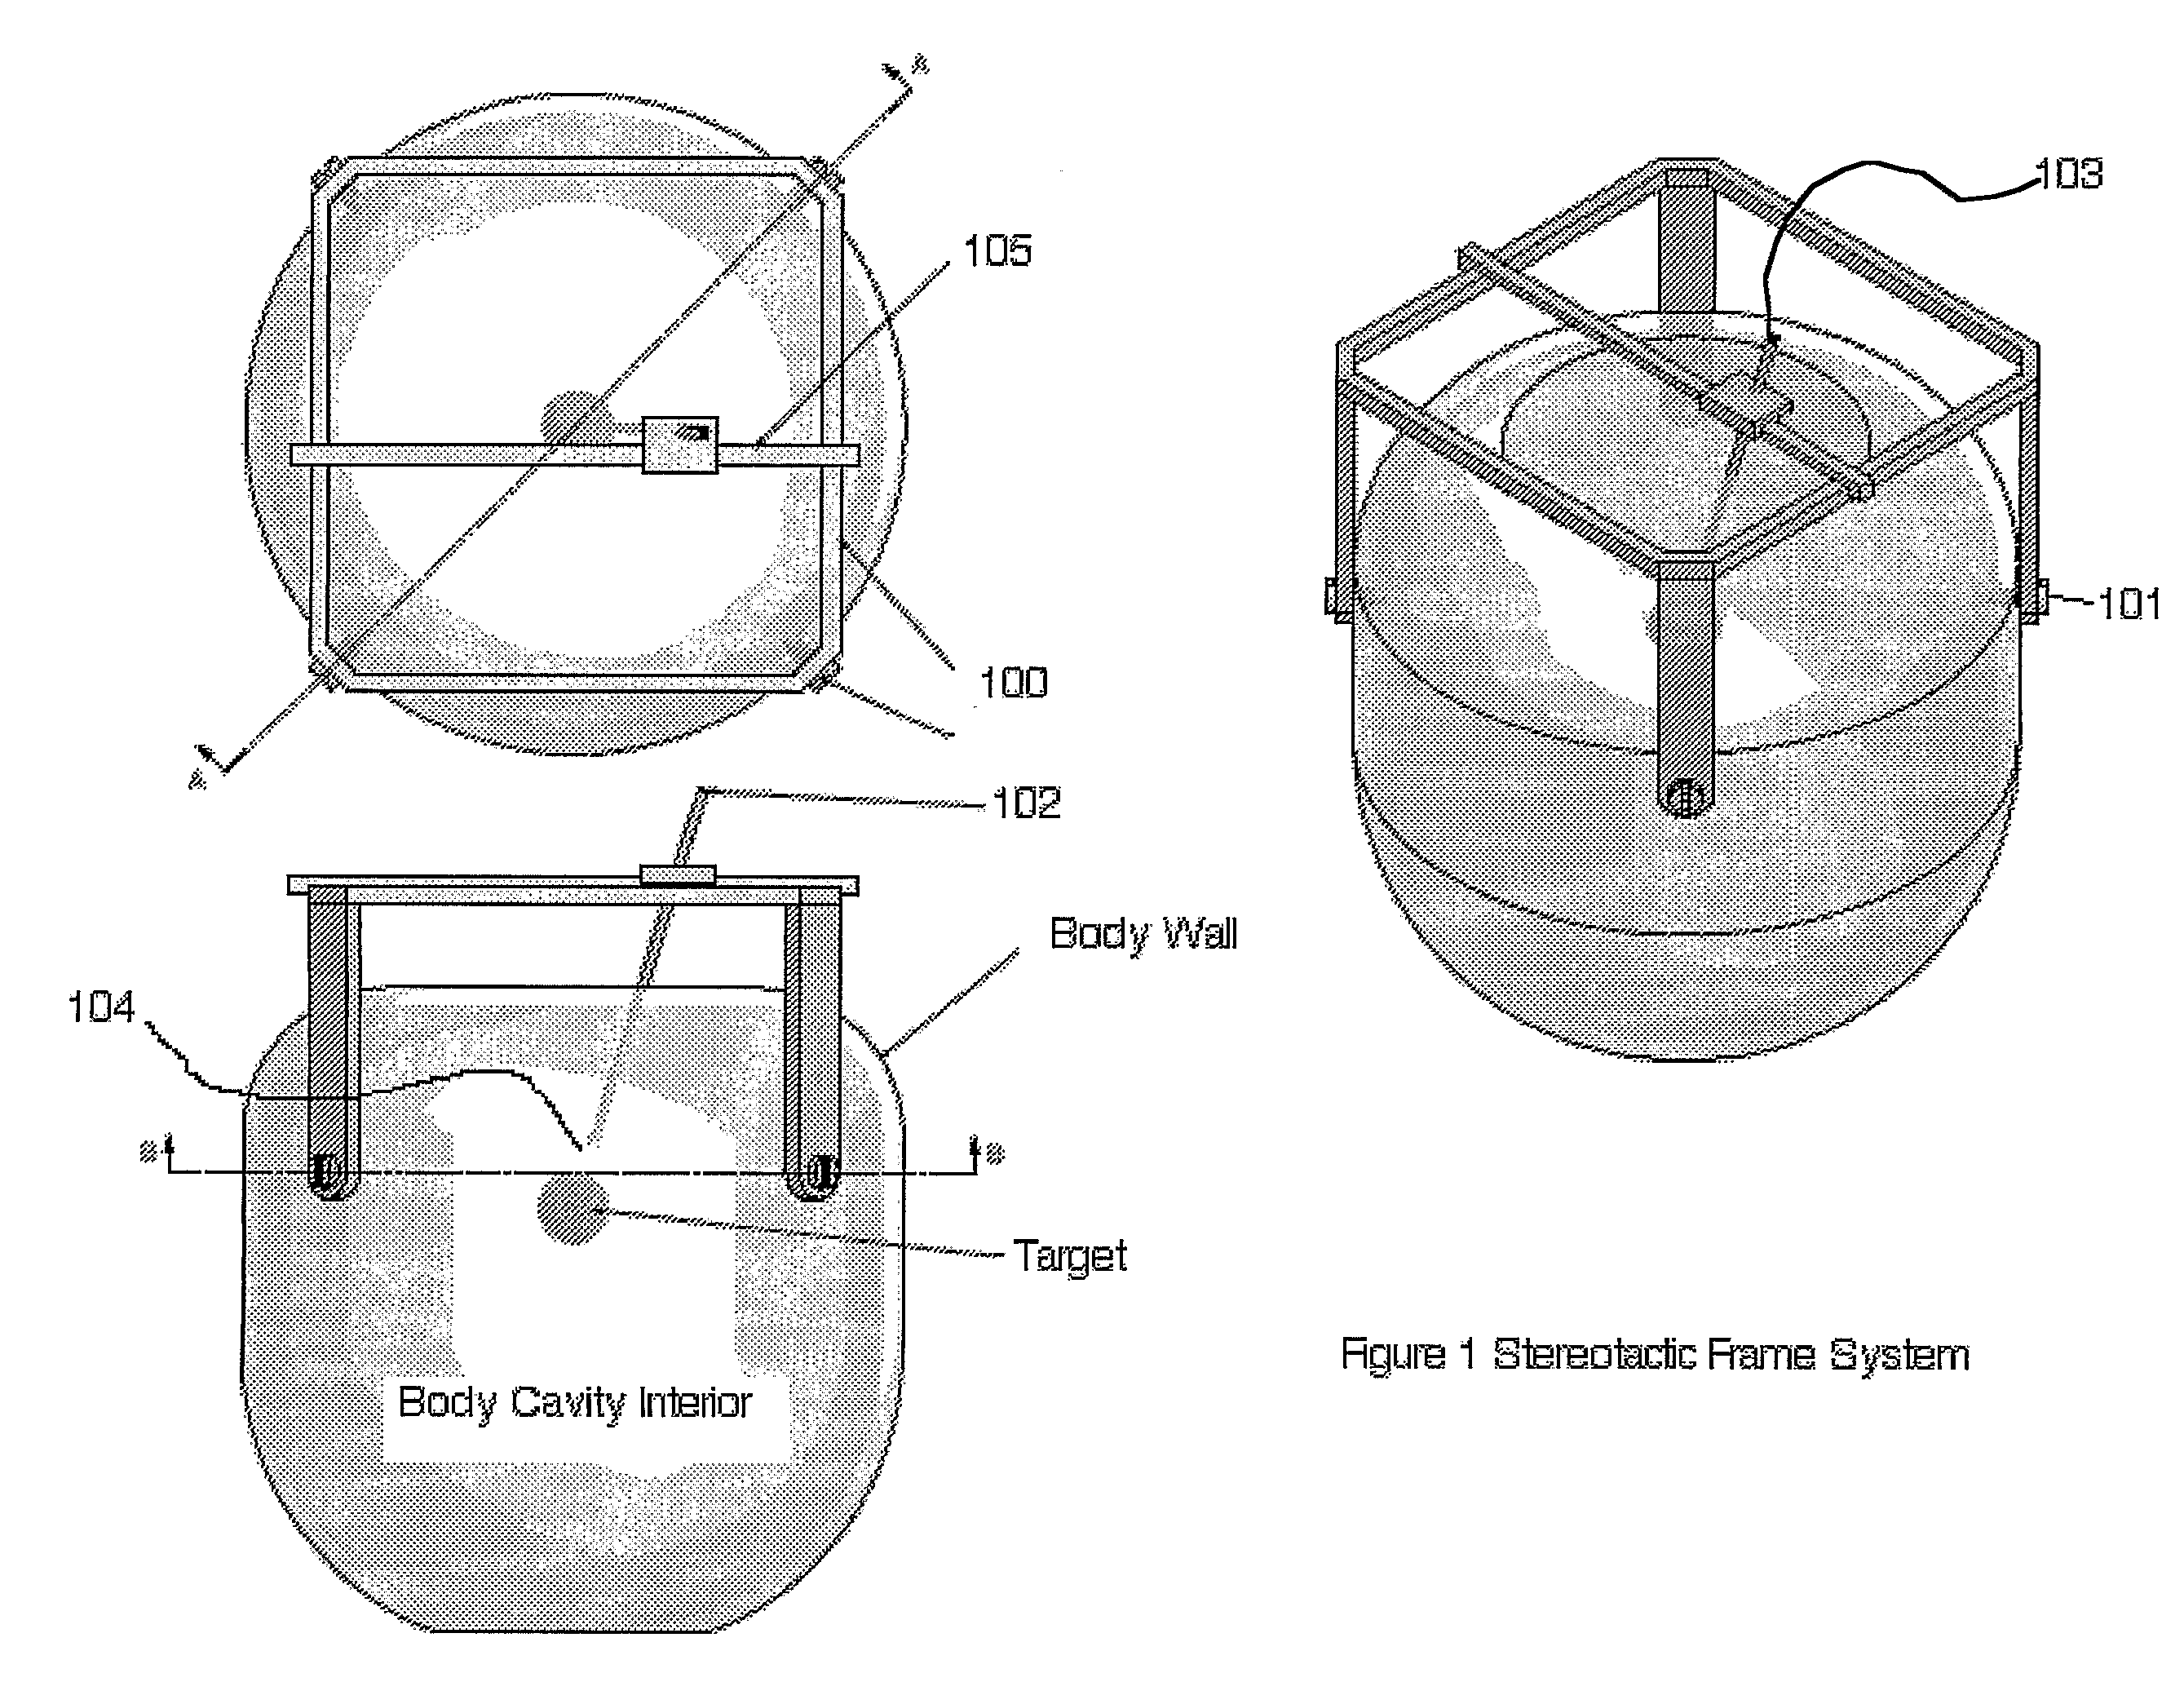 Percutaneous medical devices and methods